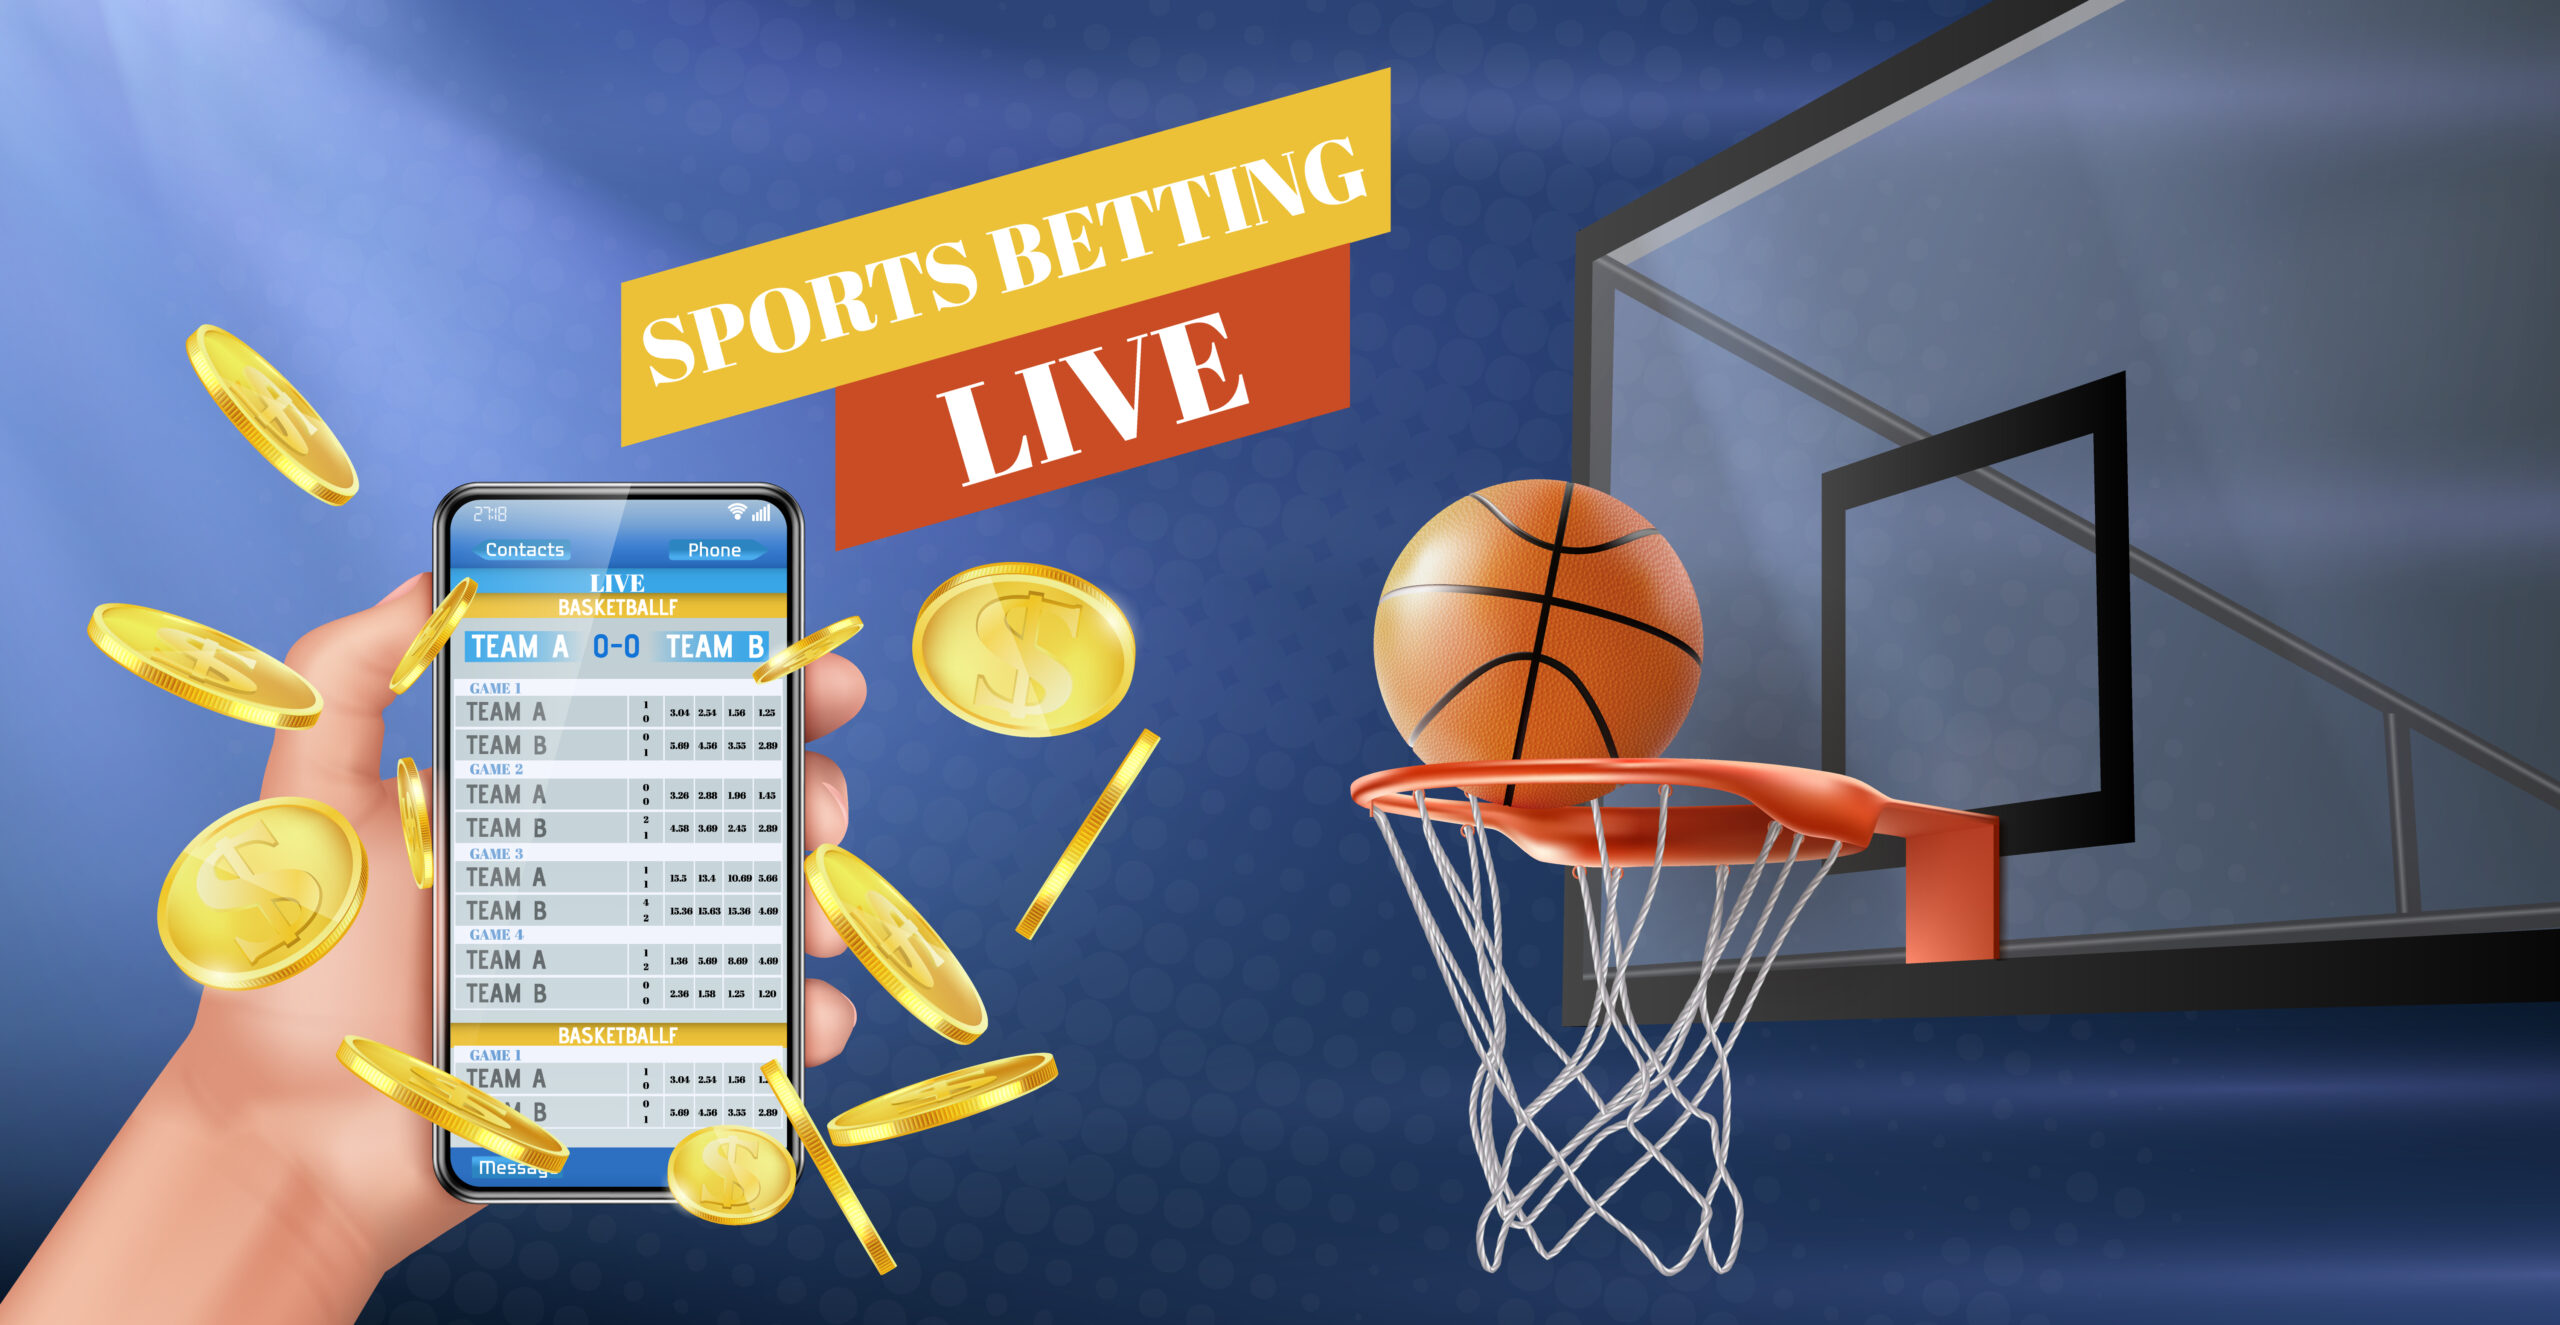 Betting Beginner’s Guide: Top 5 Best Sports to Bet On